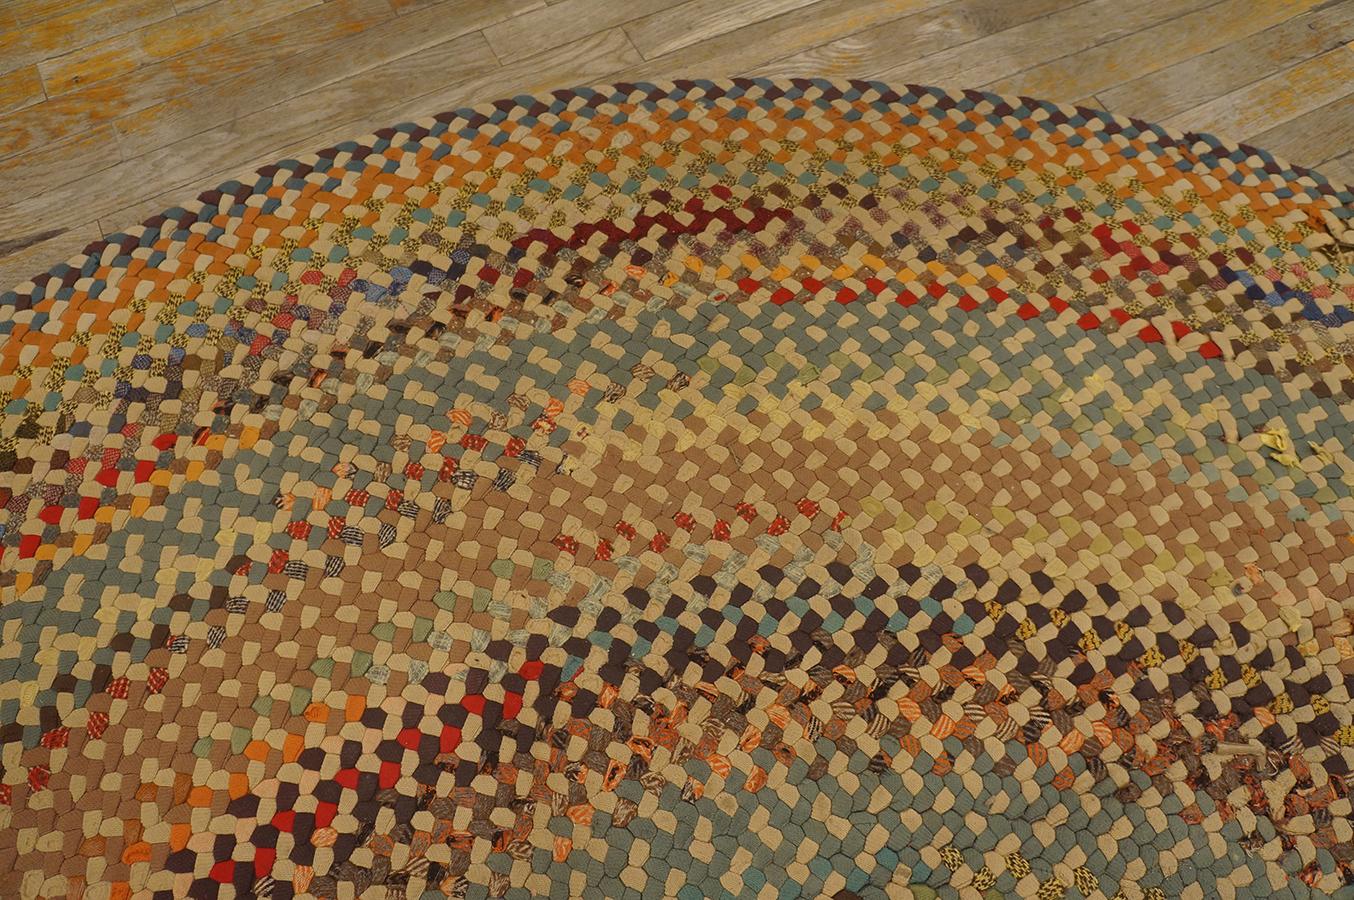 Early 20th Century American Braided Rug ( 8' x 8' - 245 x 245 ) For Sale 1